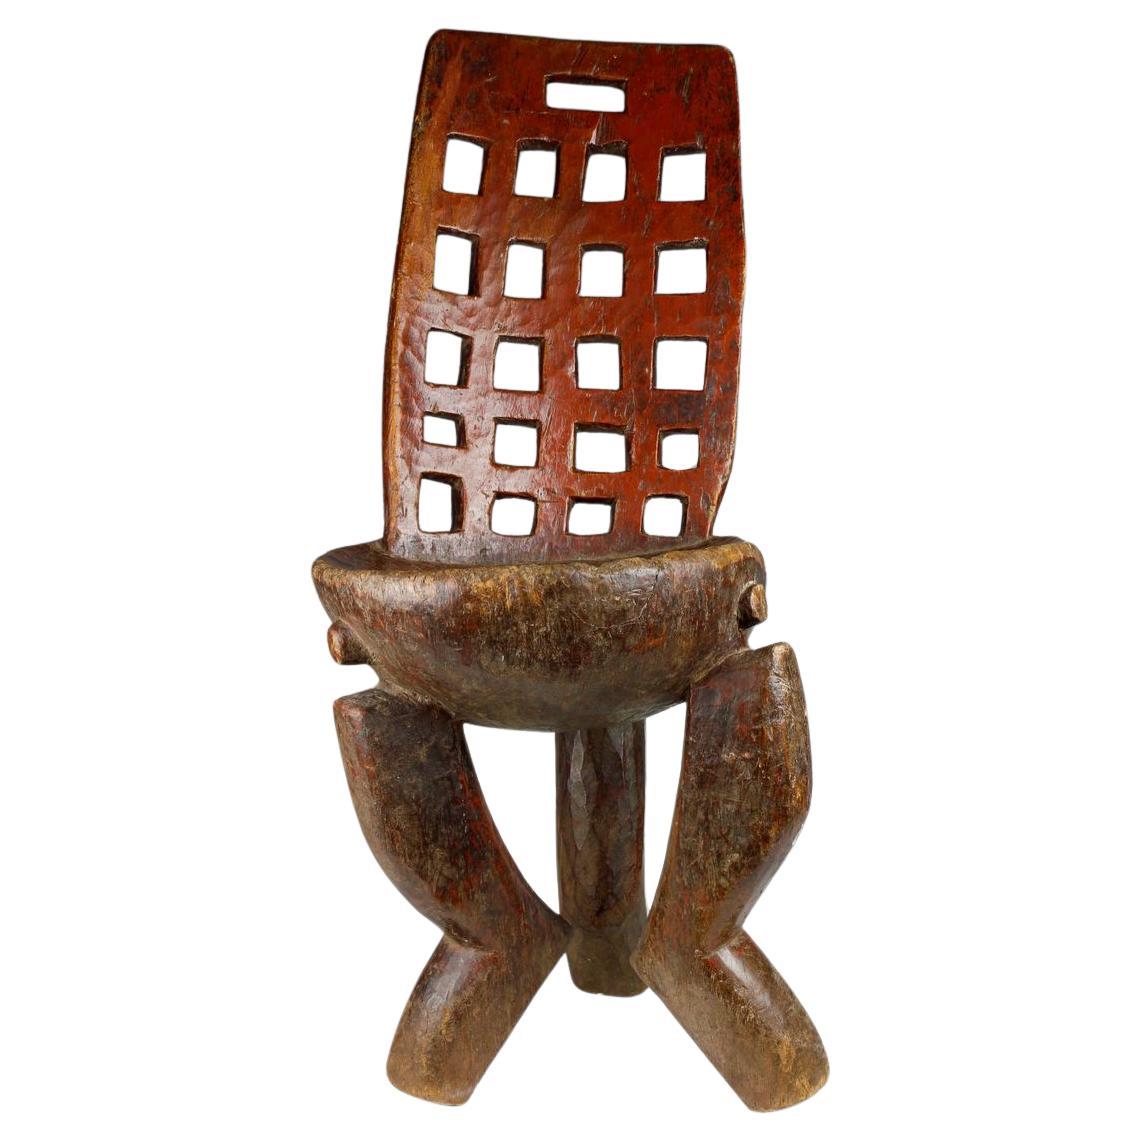 Rare 19th Century High-Backed Ethiopian Chair With Wonderful 'Dancing' Form